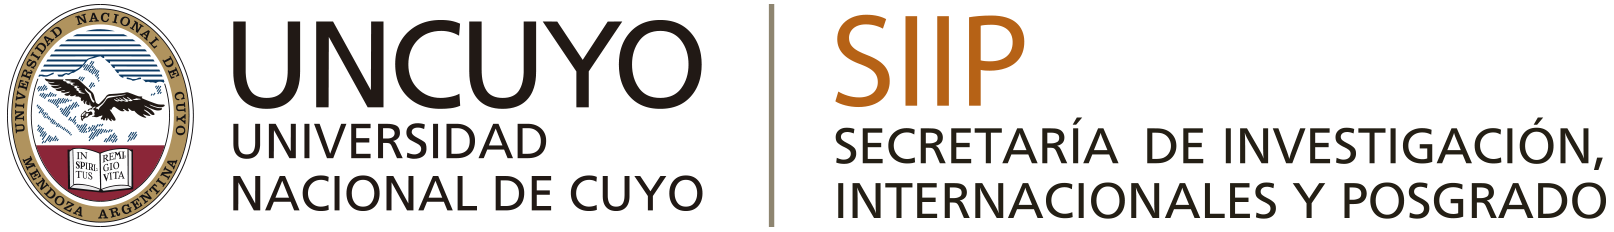 logo siip color